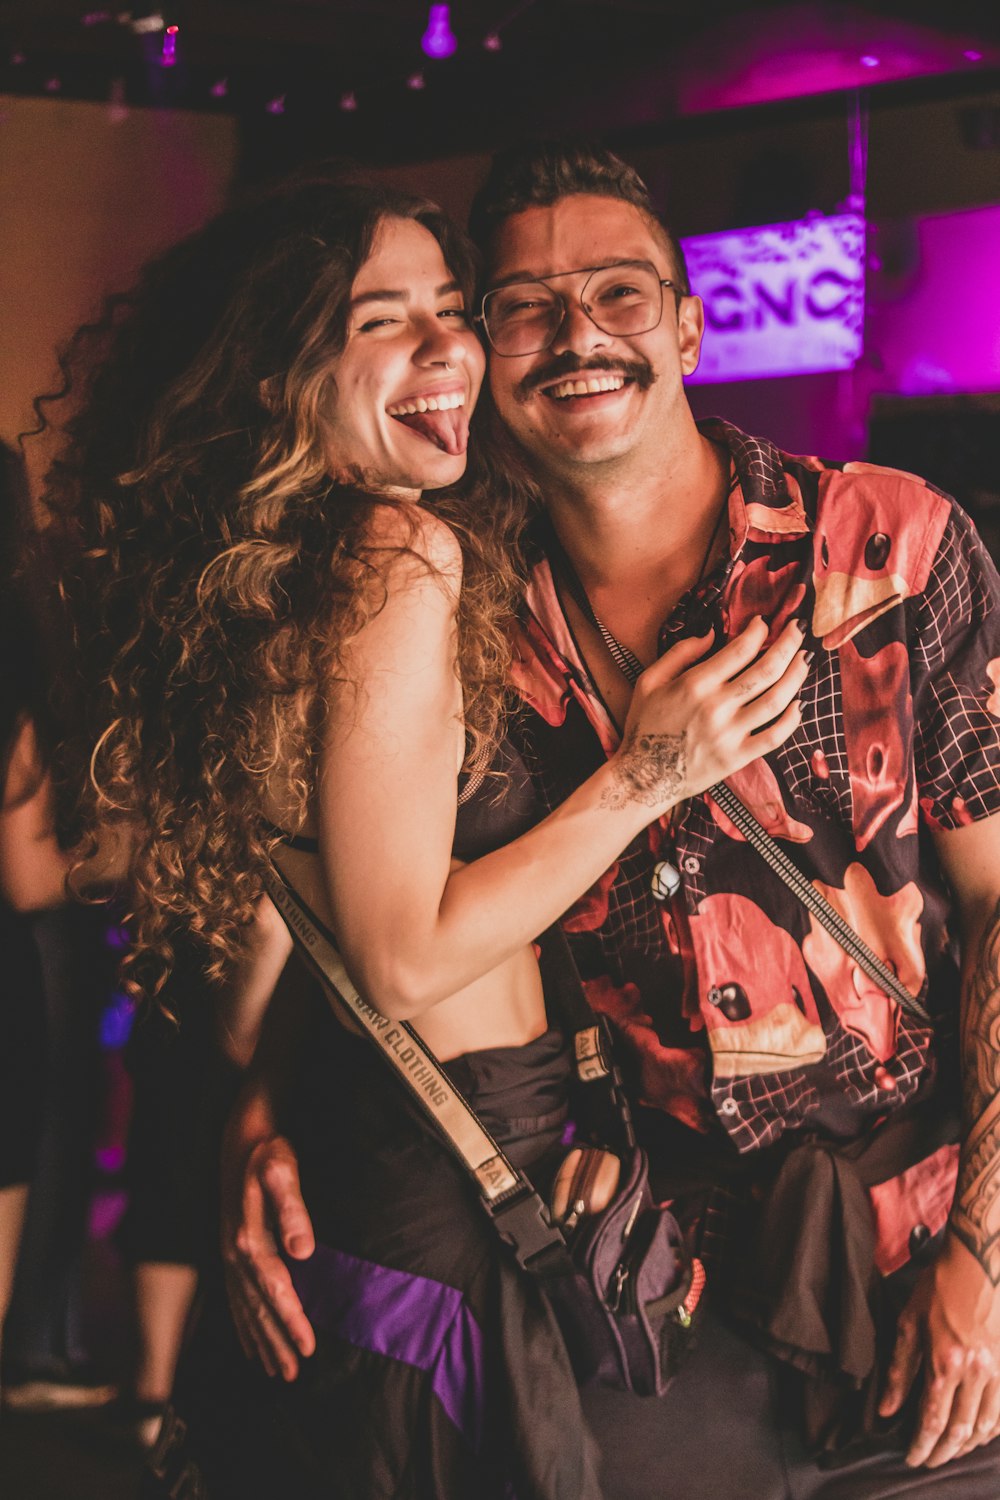 a man and a woman dancing together at a party